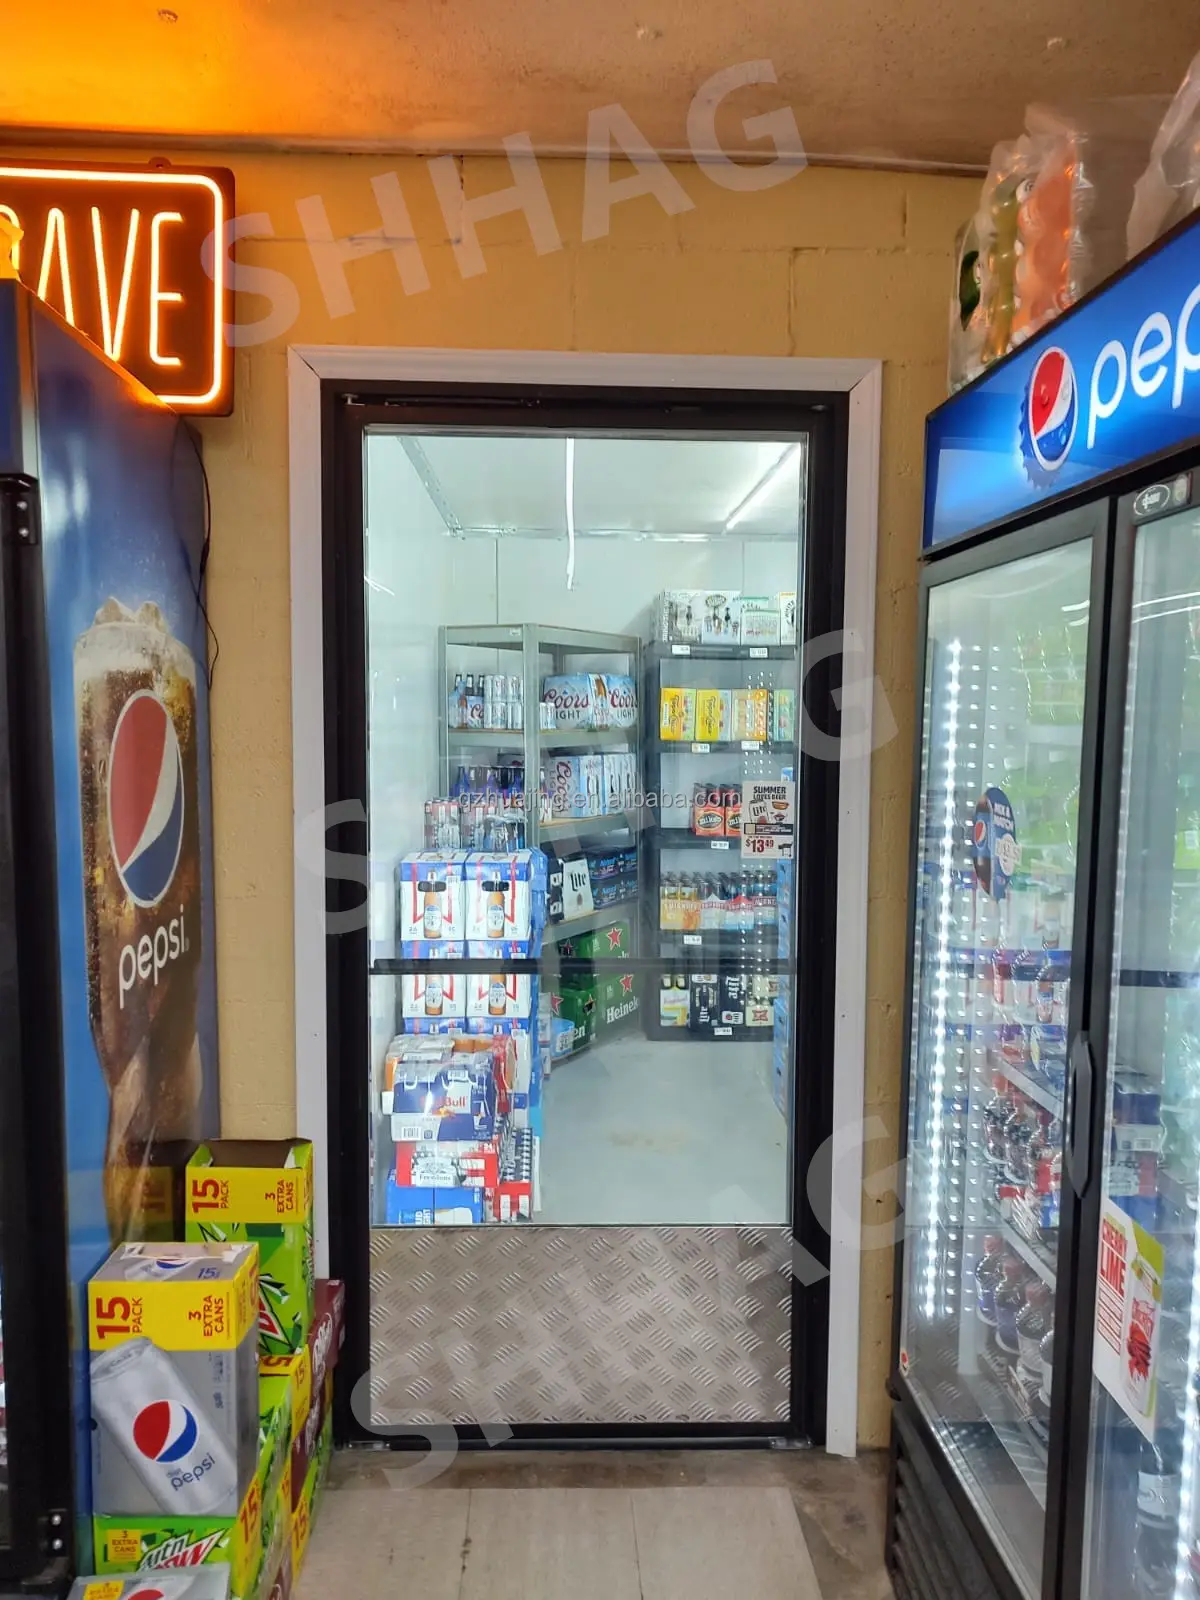 commercial refrigerationdisplay cooler Delivery from USA-walk in cooler room glass doors with shelves and sandwich panels